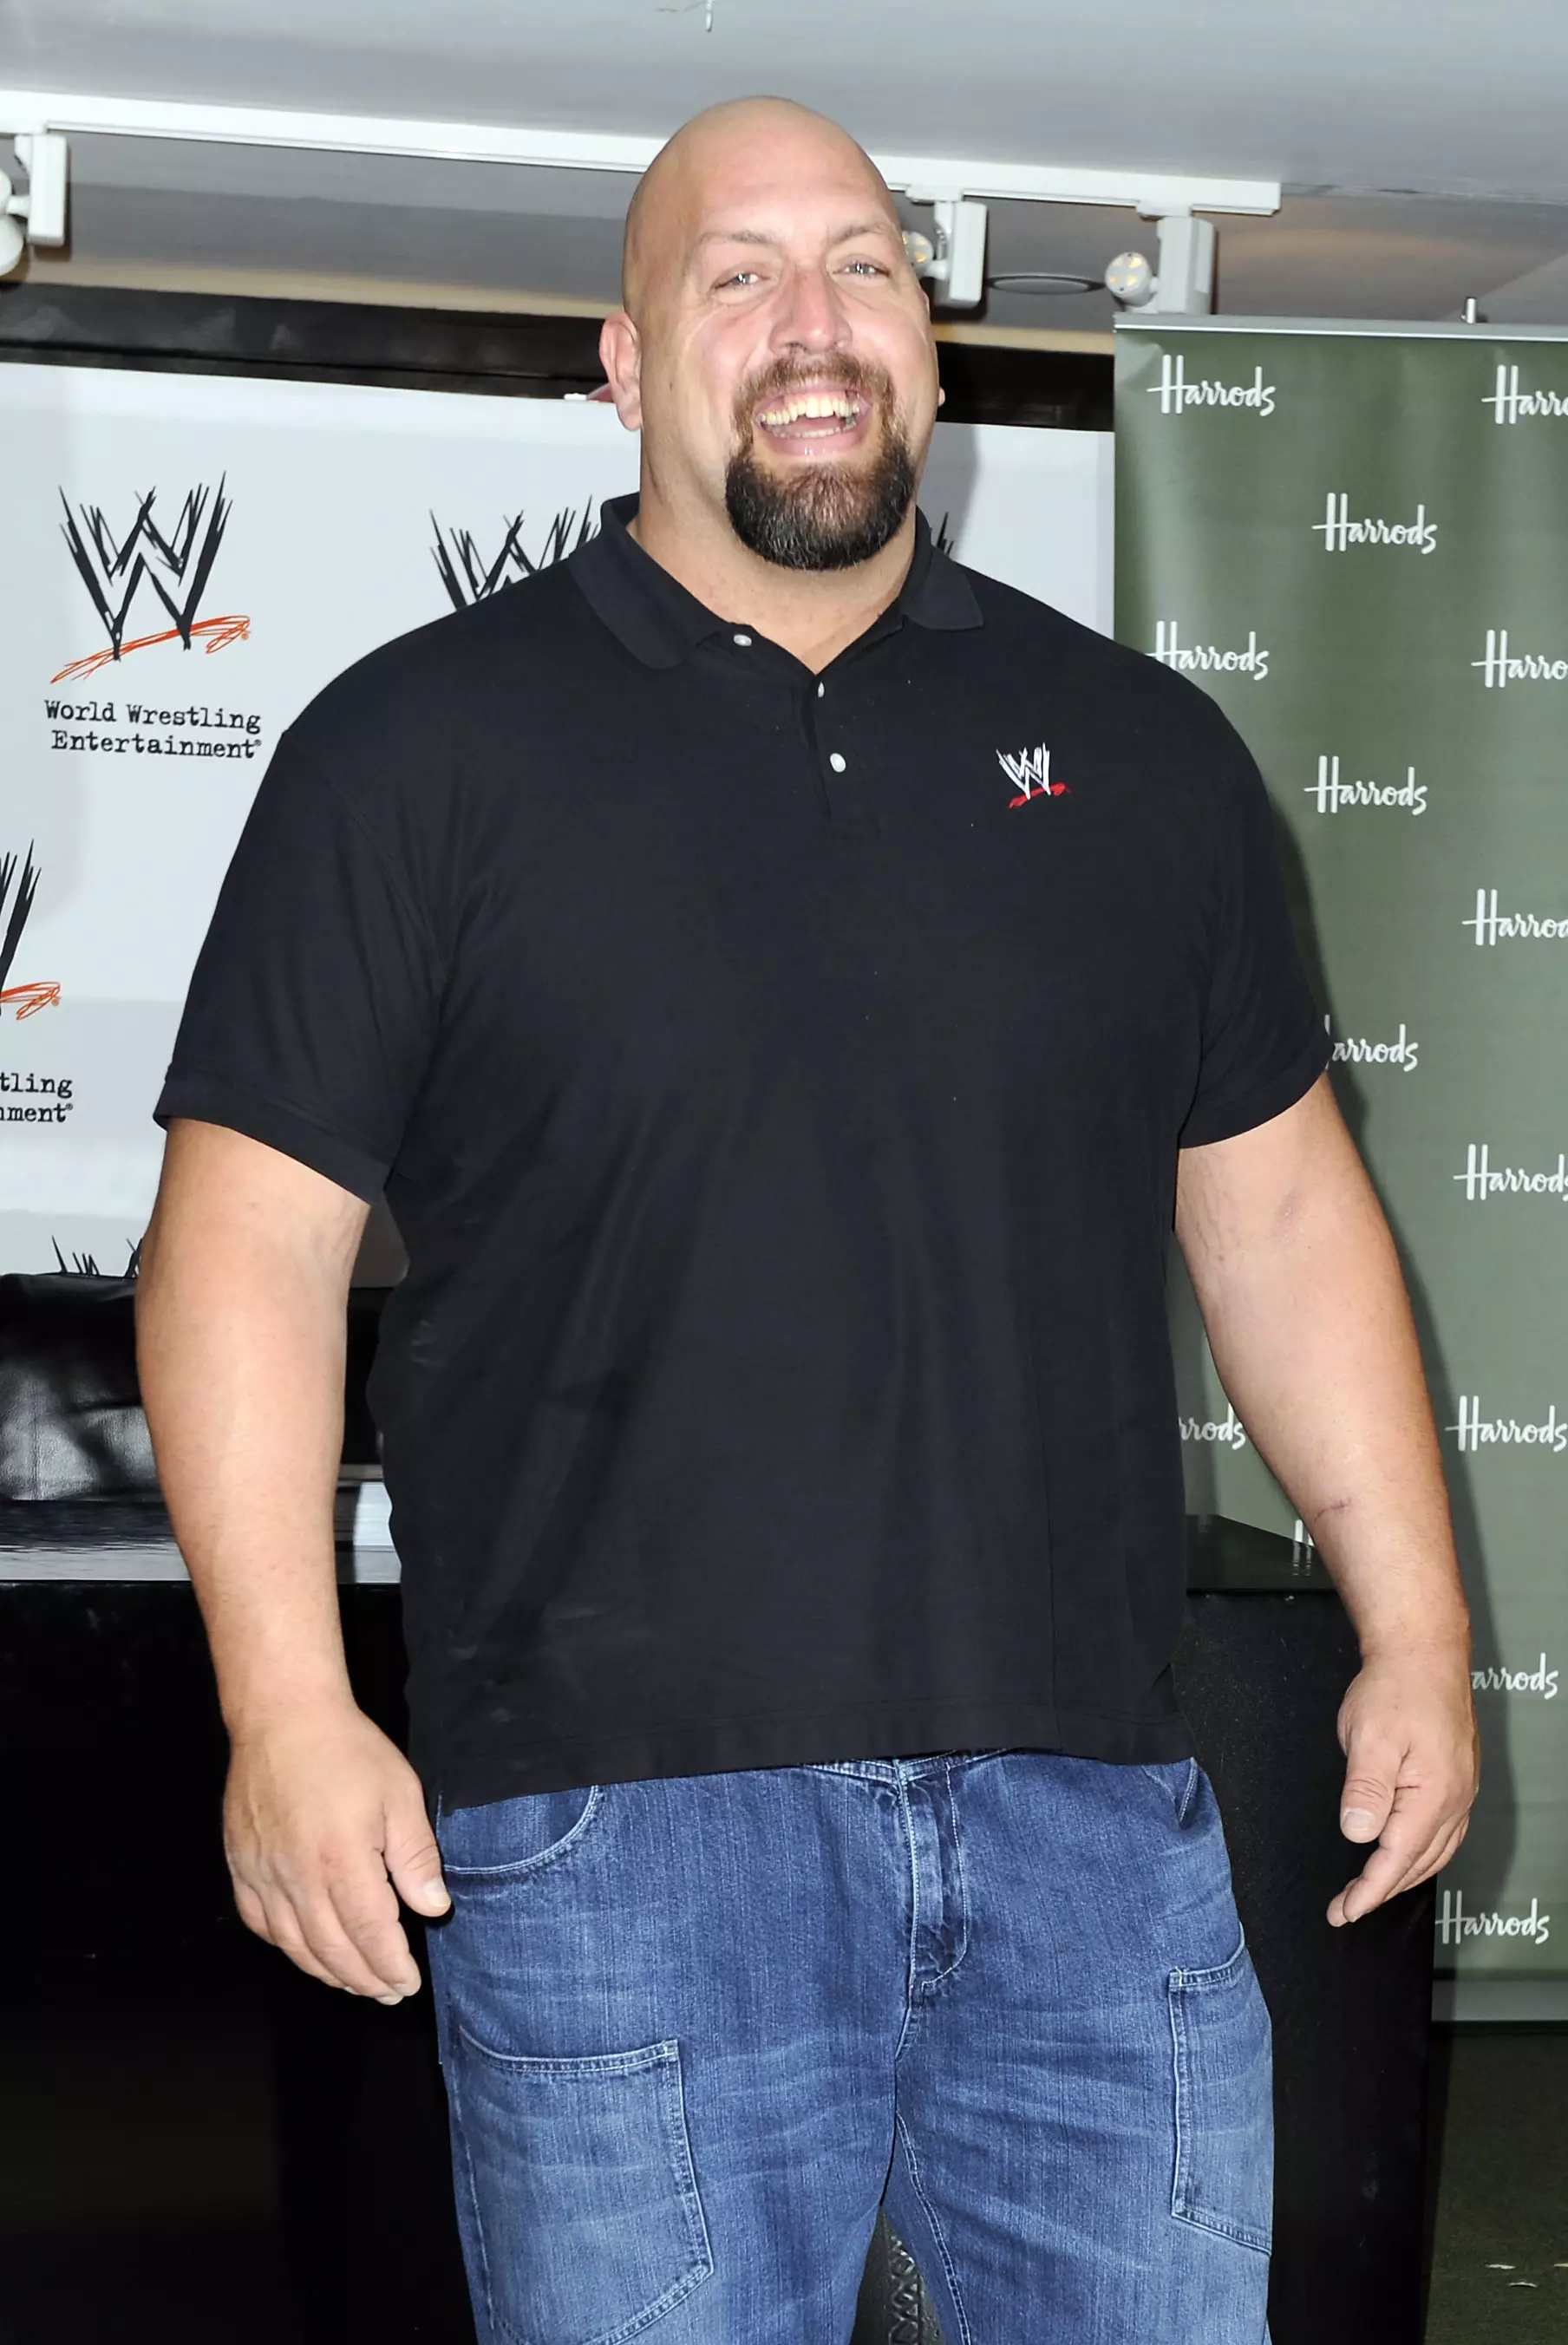 The Big Show had apparently been suffering with a bad bout of food poisoning.